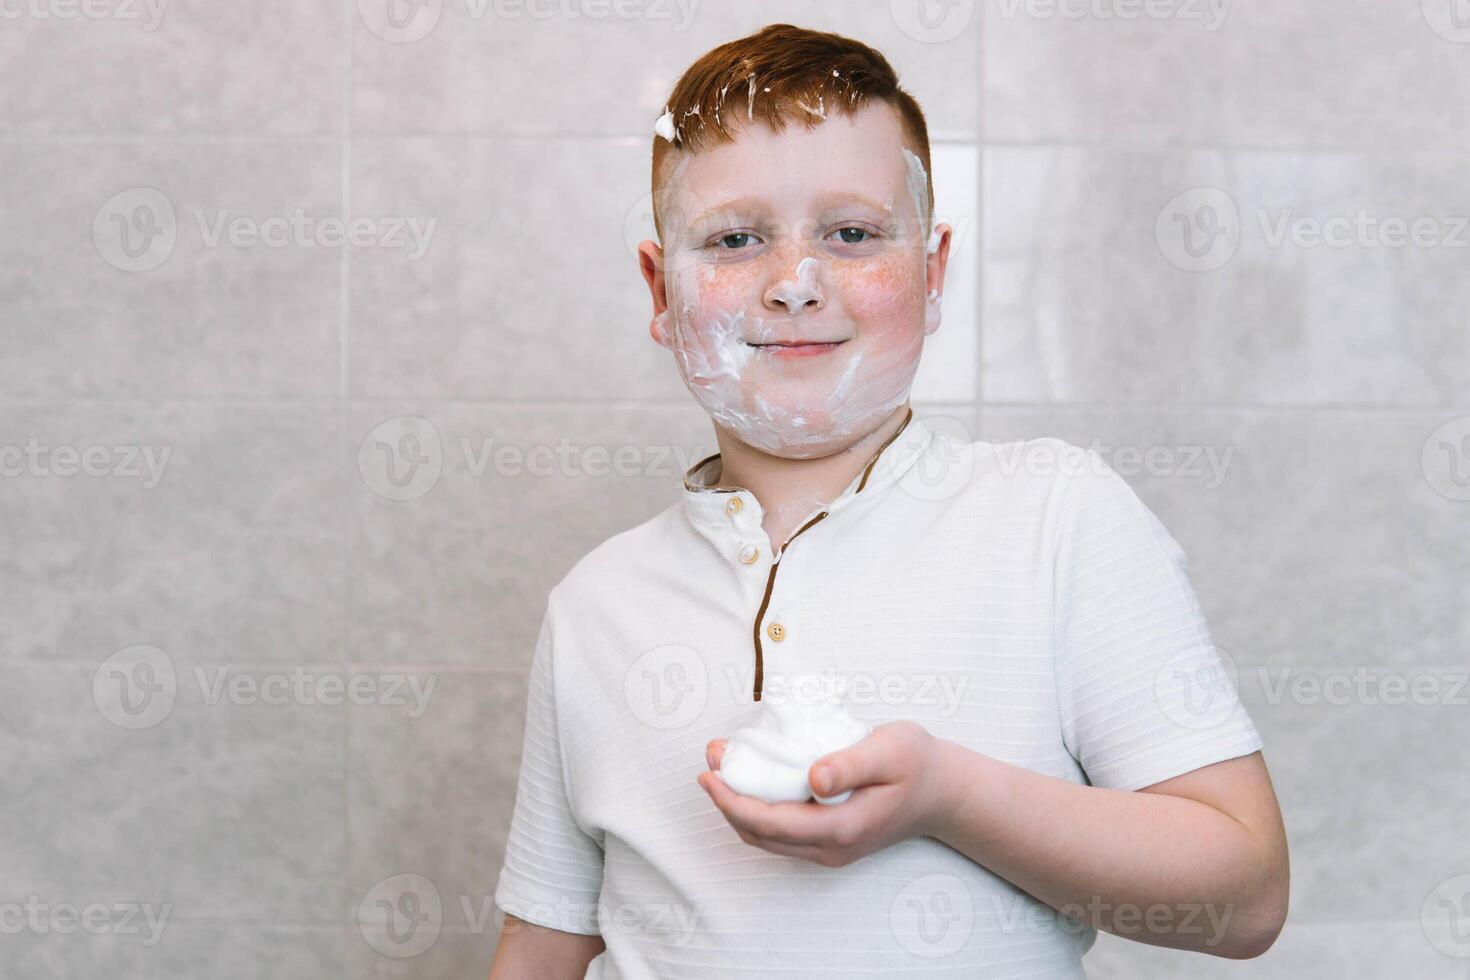 Funny boy in the bath with shaving cream on his face photo